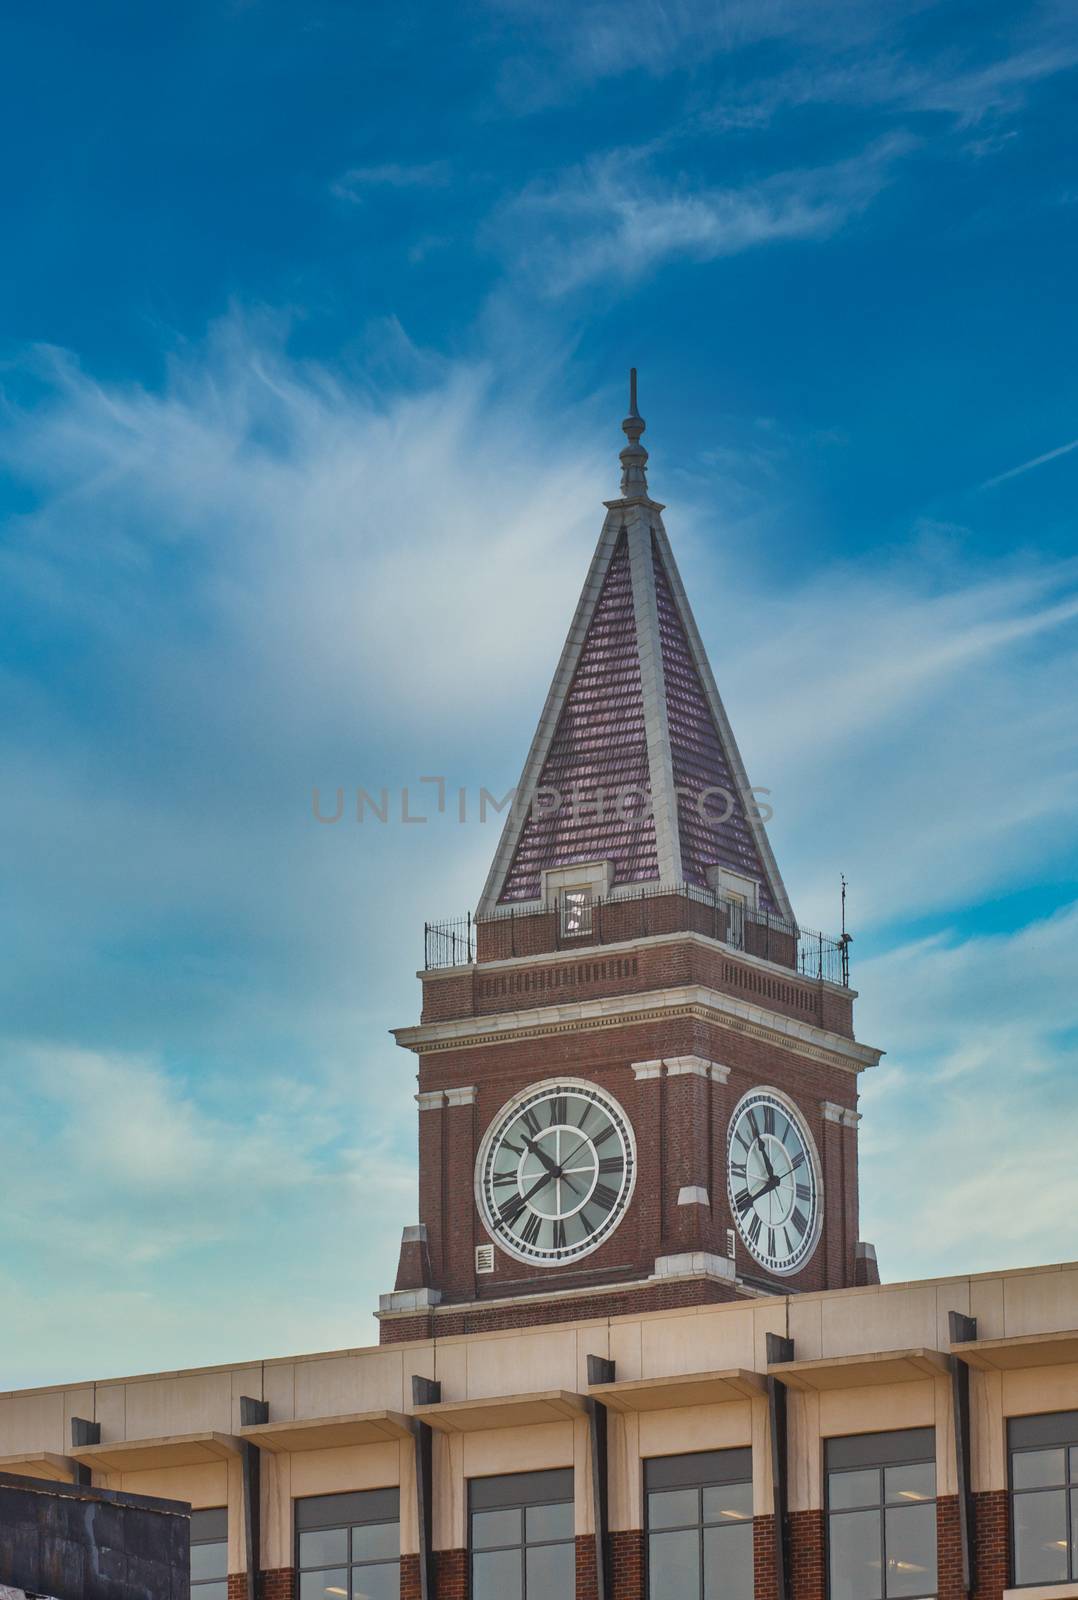 Clock Tower on Building in Seattle by dbvirago